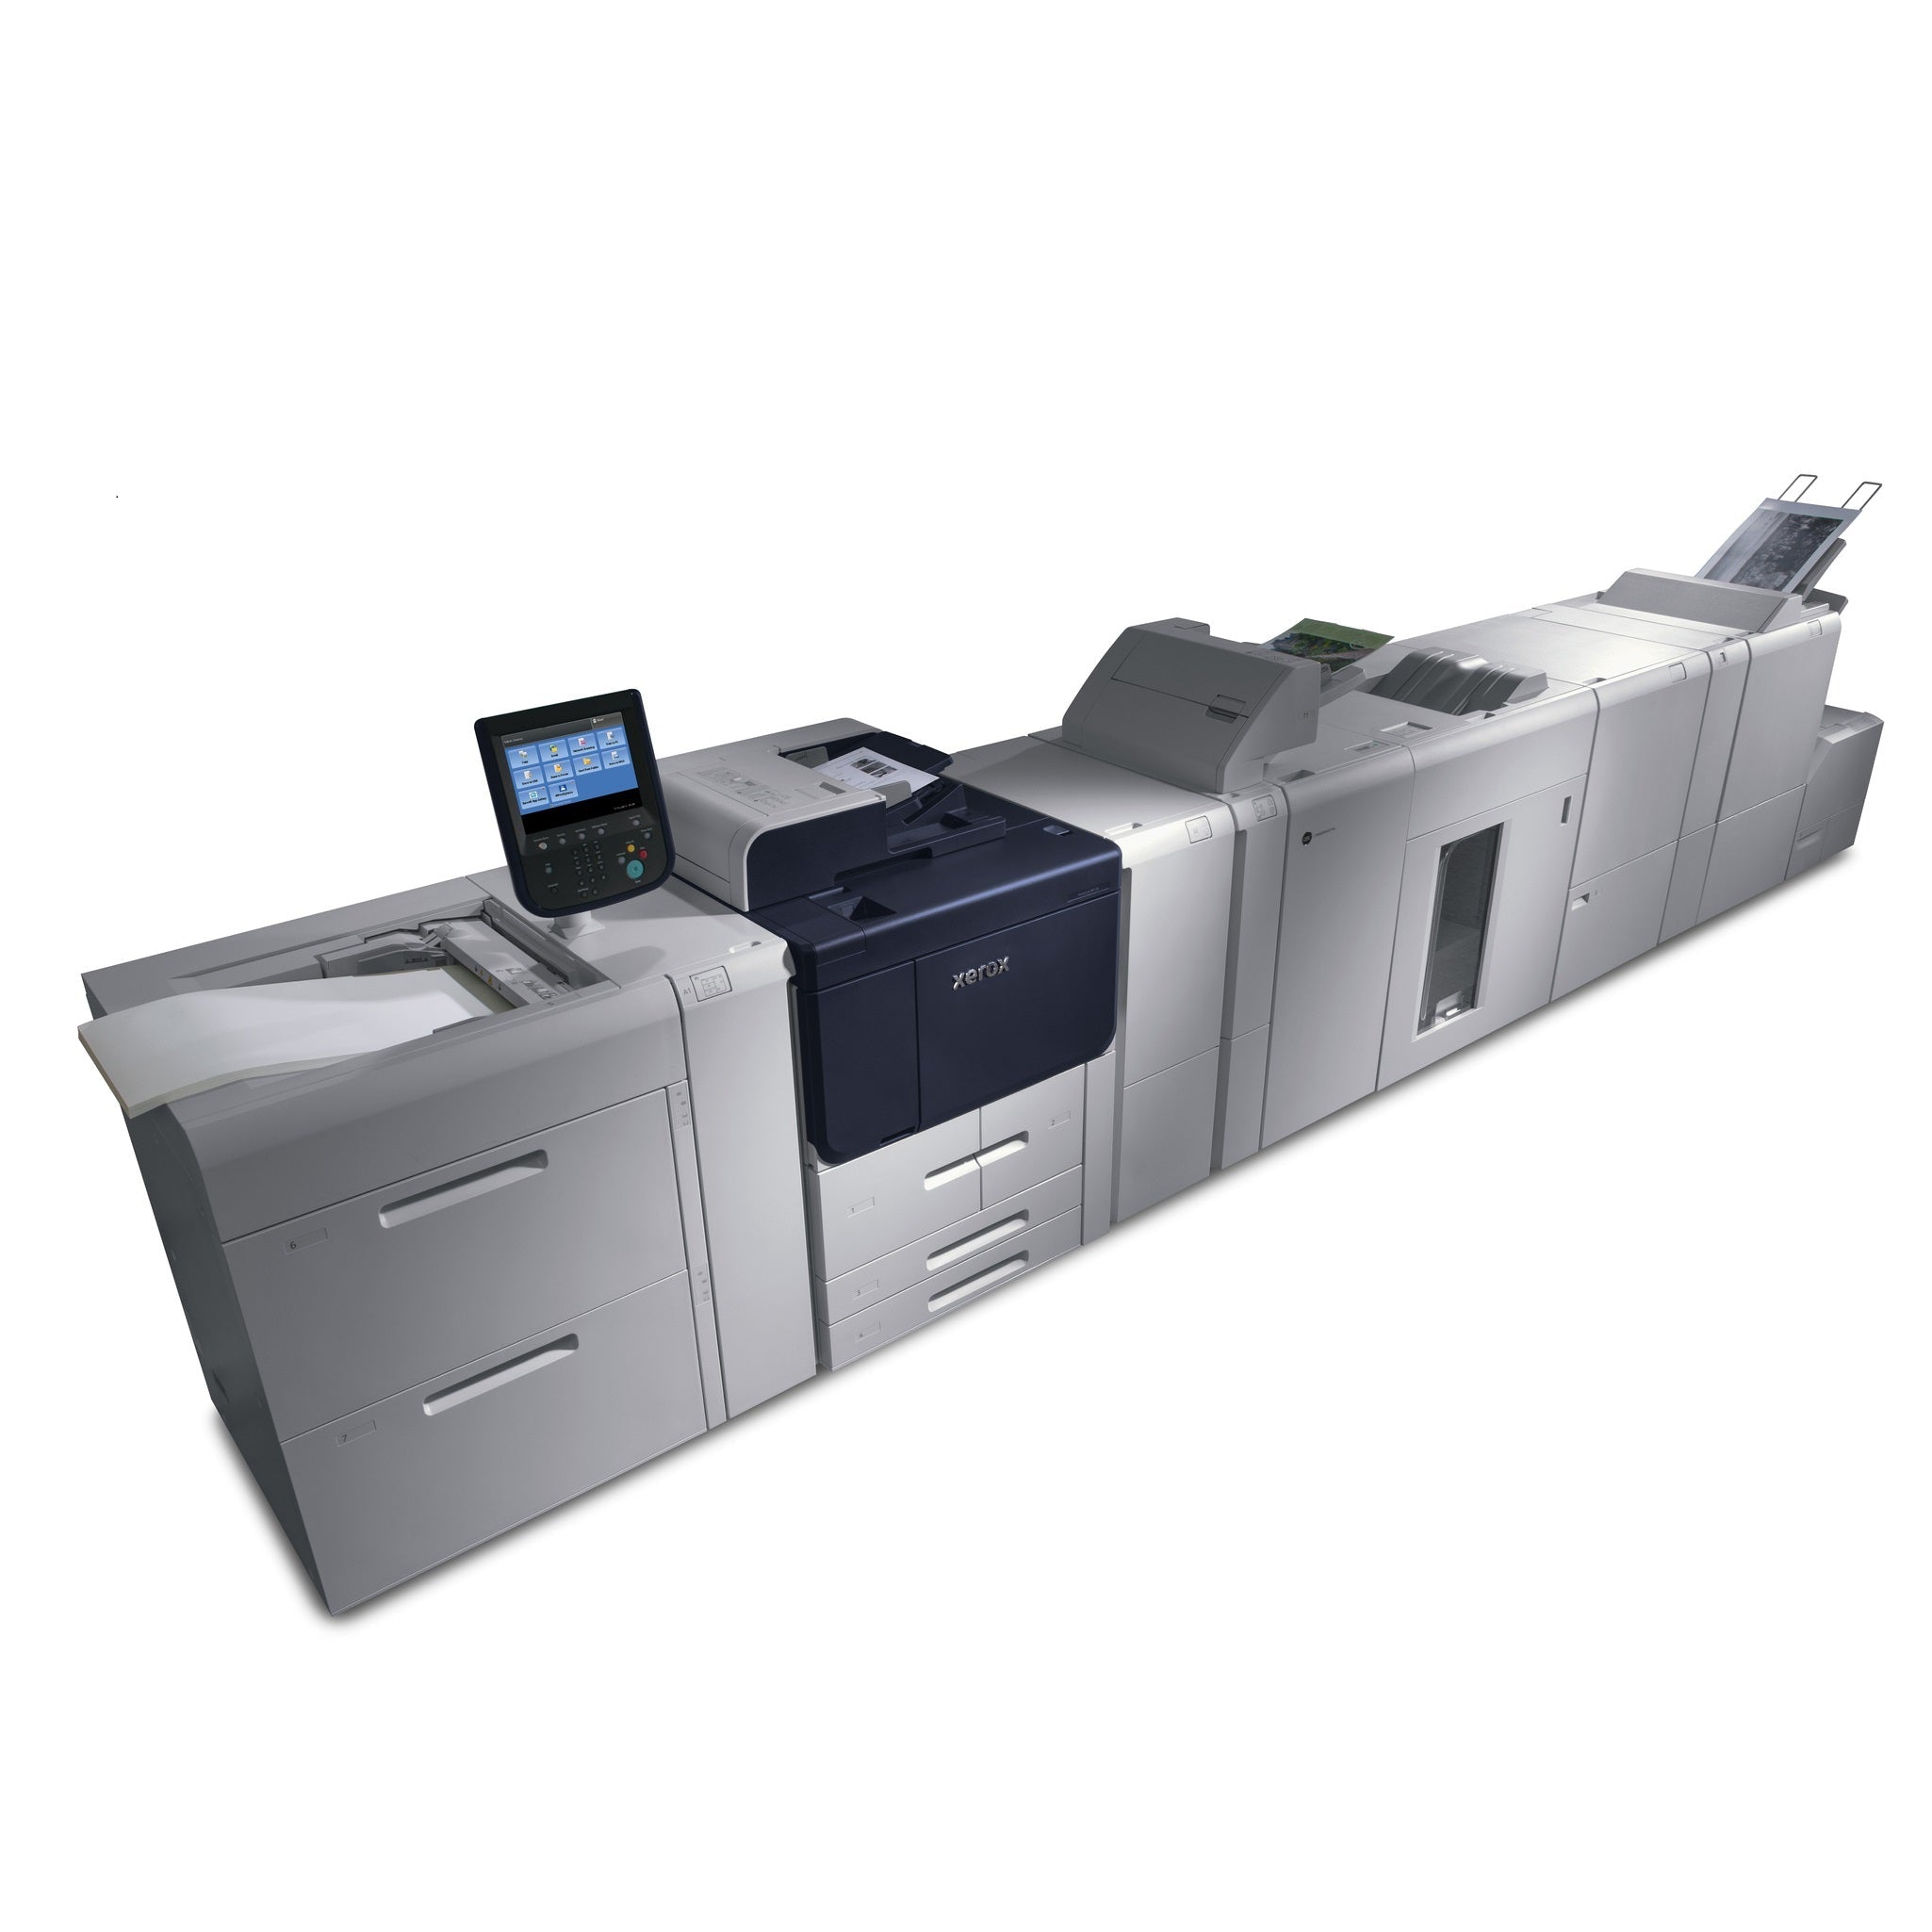 Xerox PrimeLink B9136 High Speed Monochrome All-In-One Photocopier Printer - Office Friendly Black And White Production Printer